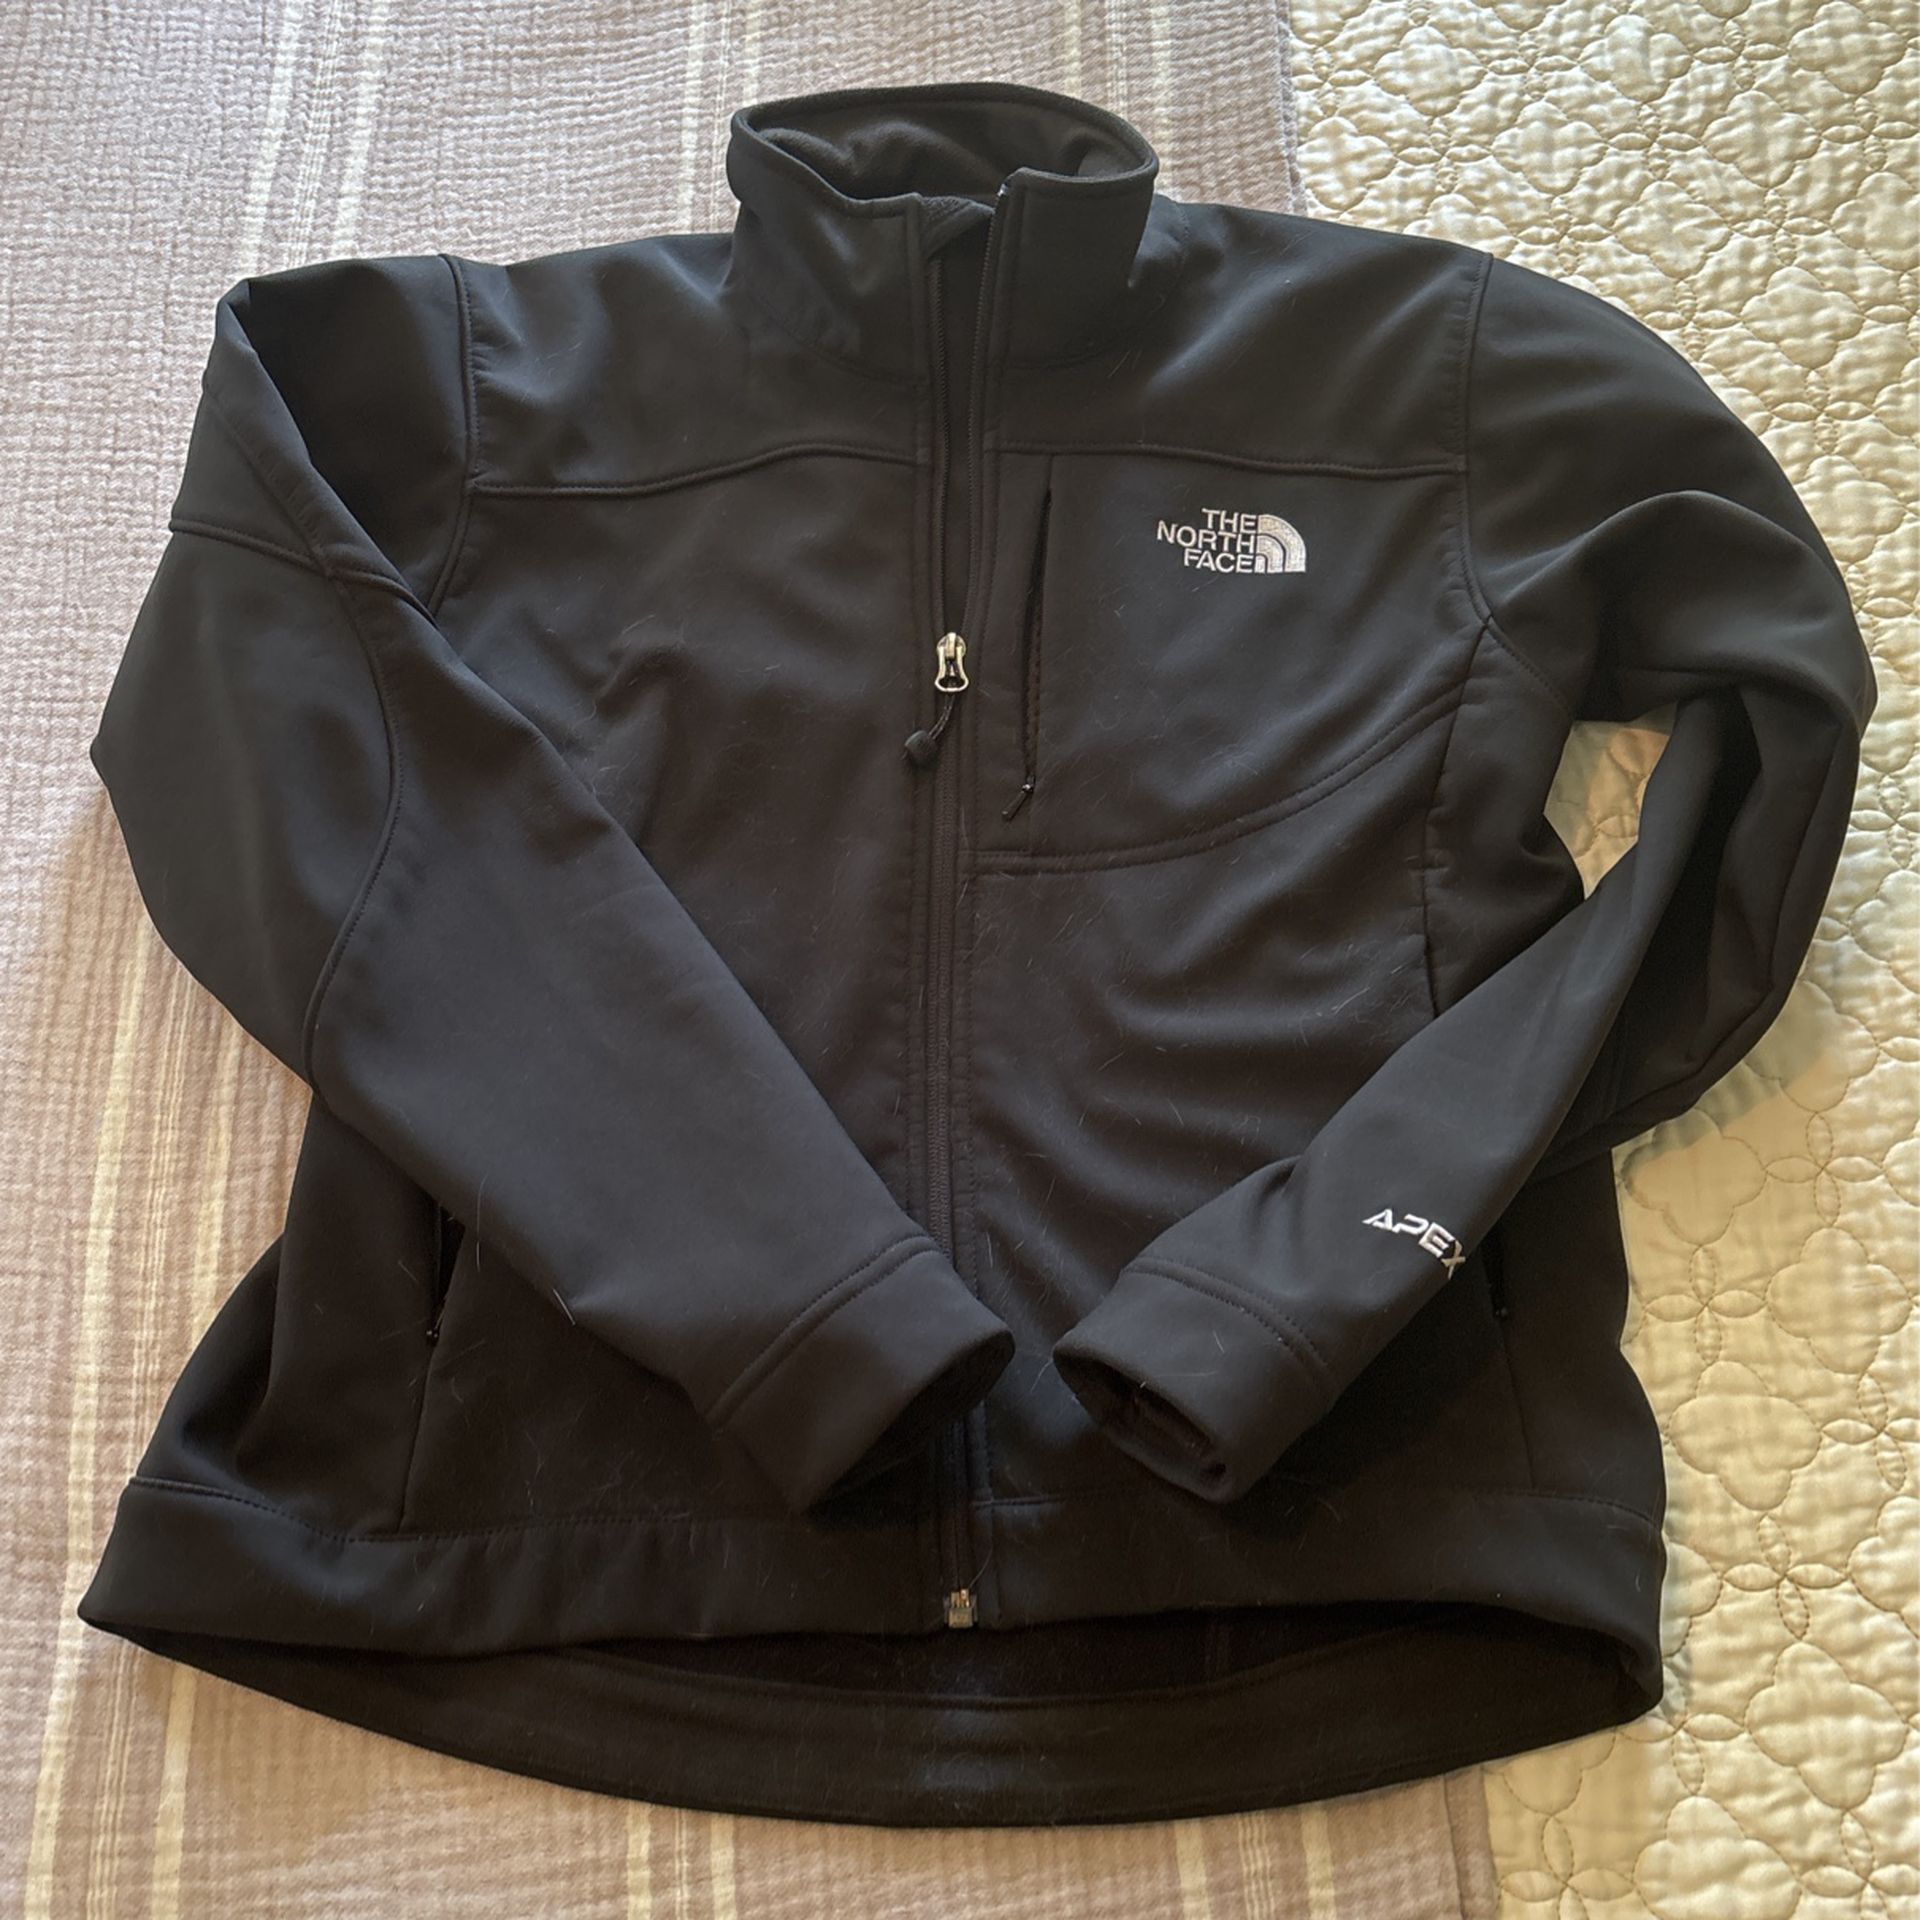 Woman’s Small North face Black Jacket